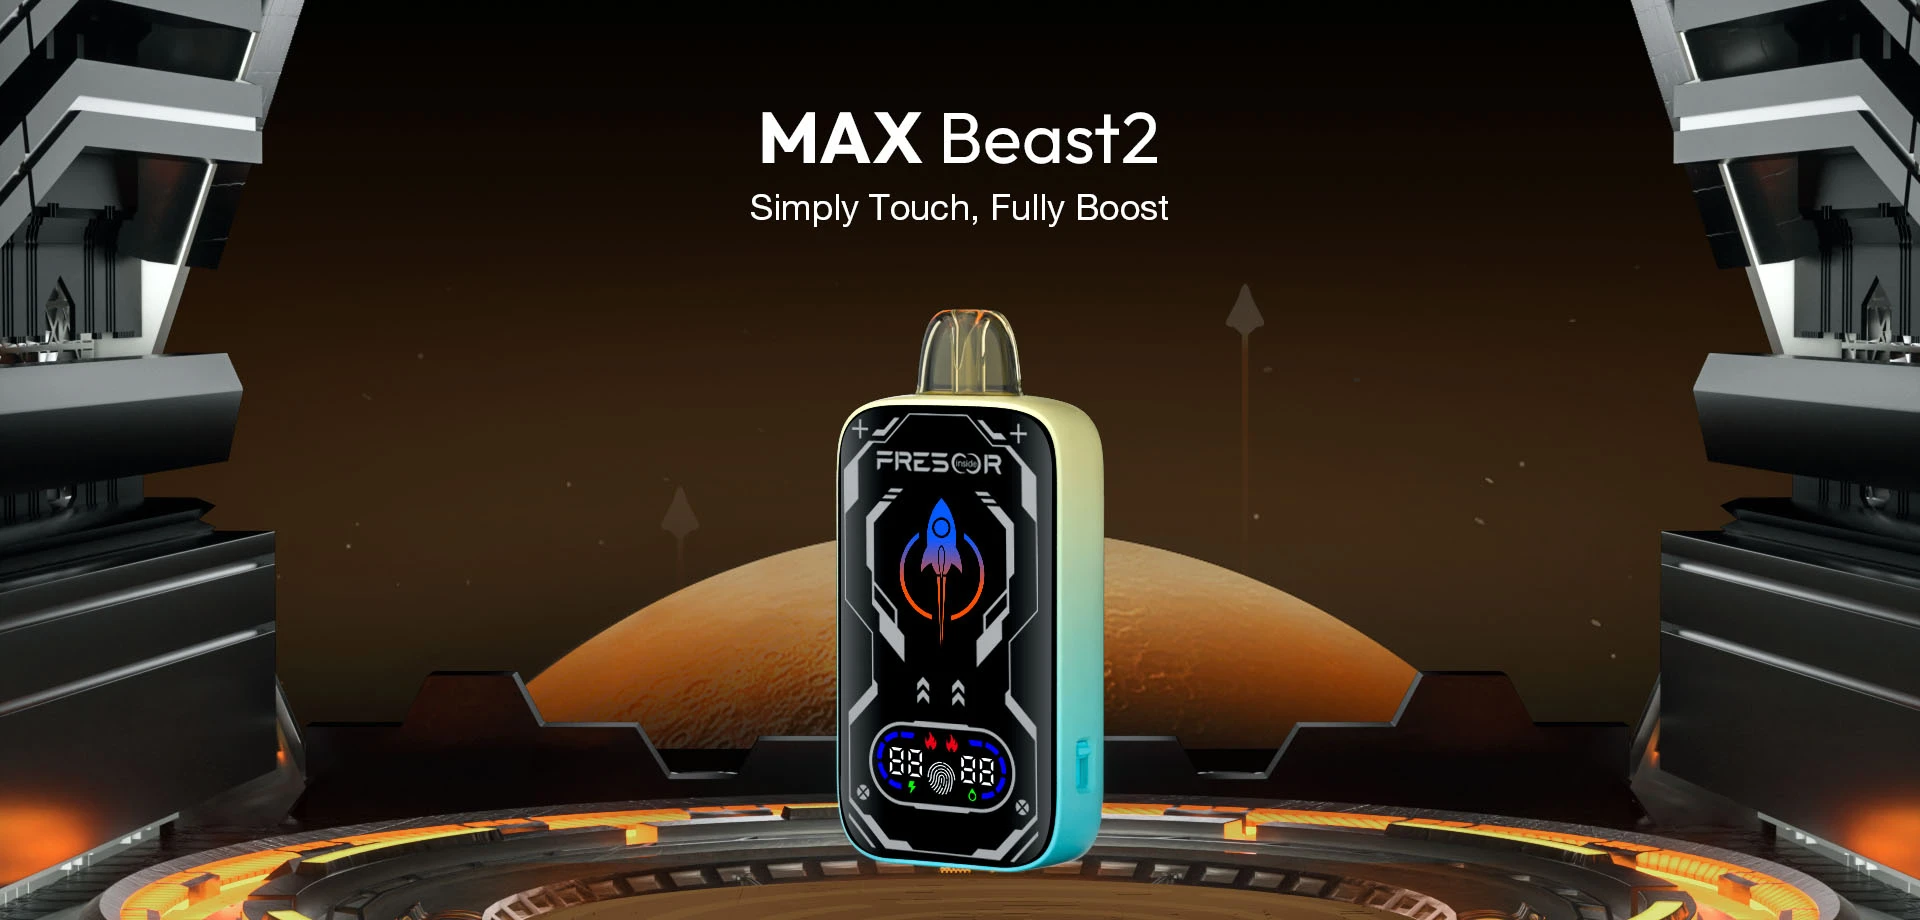 MAX Beast2 Simply Touch, Fully Boost